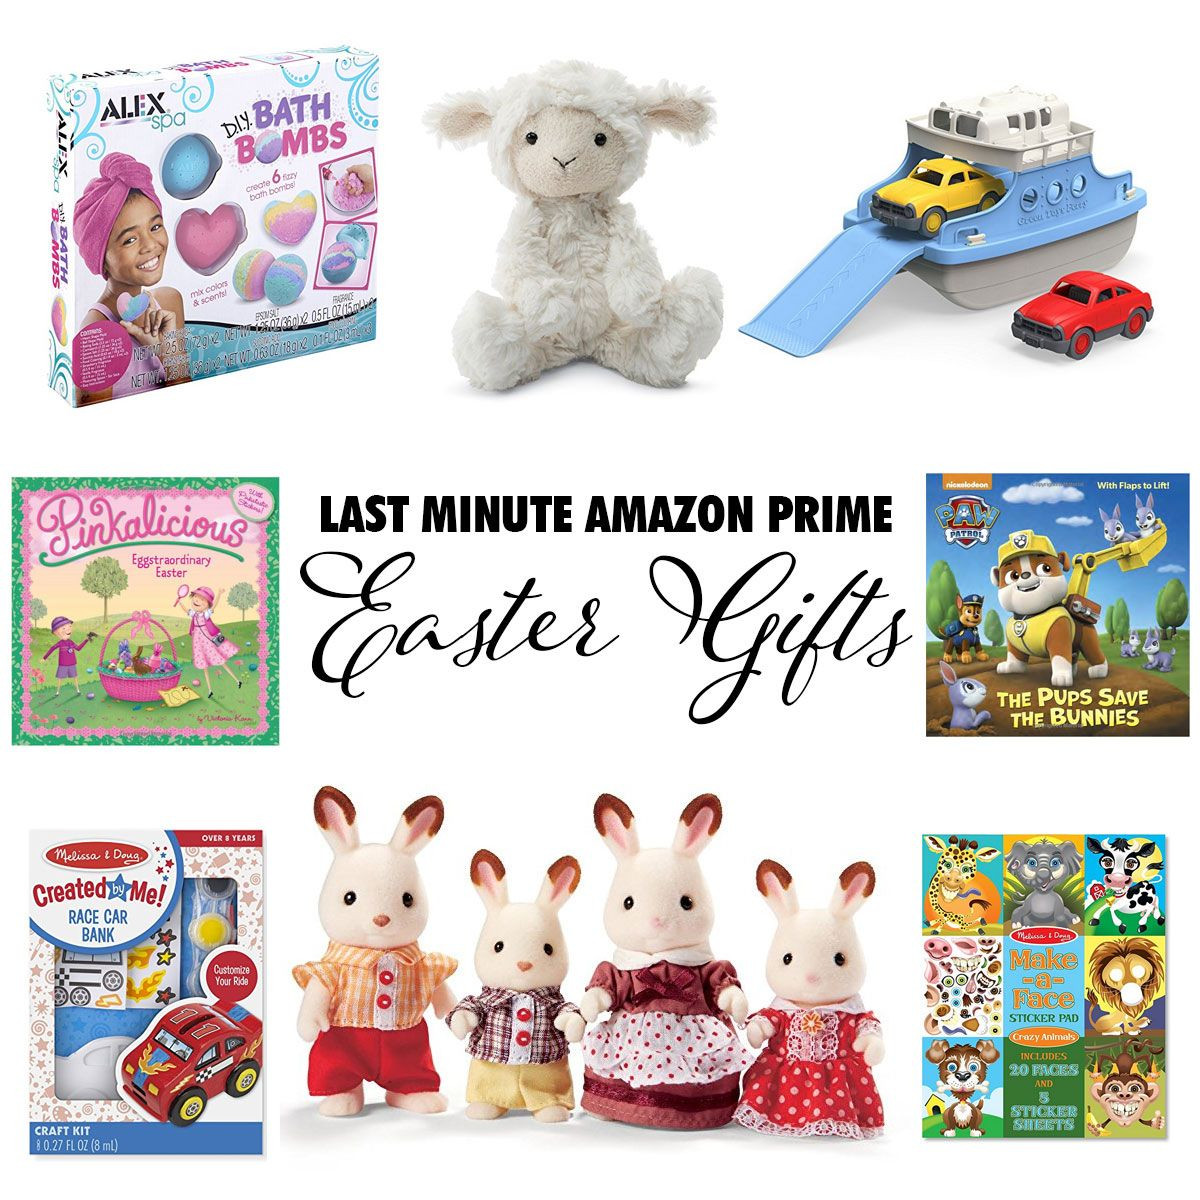 Last Minute Easter Basket Gift Ideas Kids
 Last Minute Amazon Prime Easter Gifts